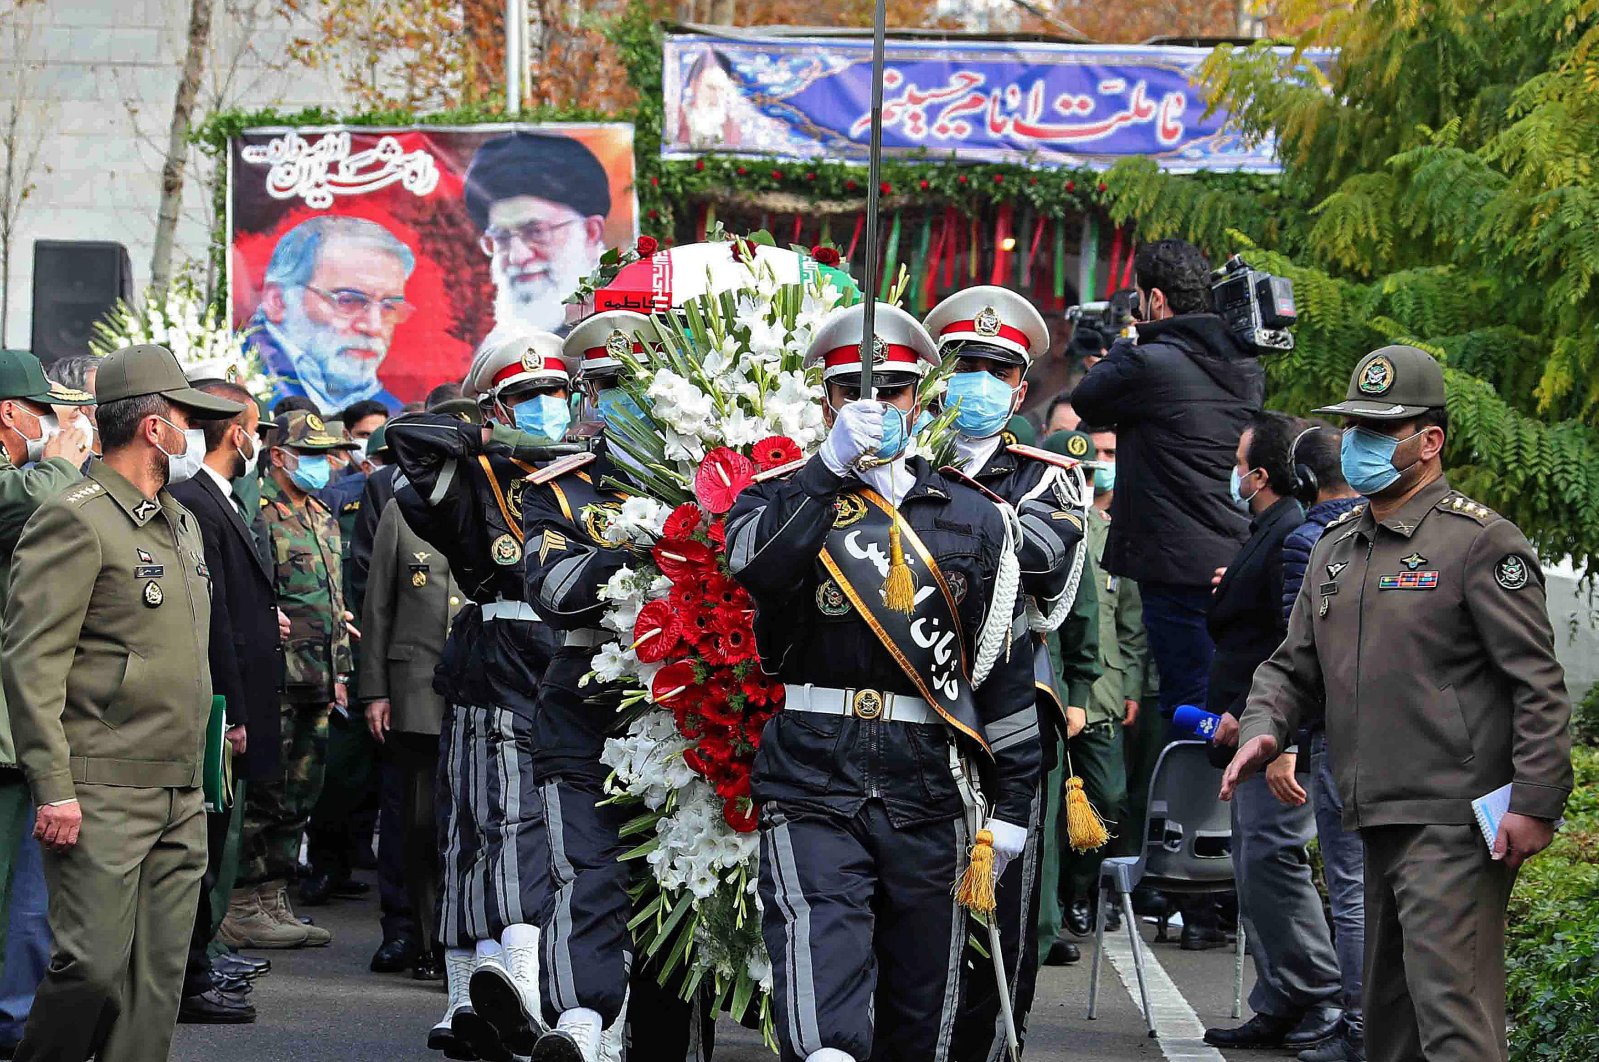 Members of Iranian forces carry the coffin of slain top nuclear scientist Mohsen Fakhrizadeh during his funeral ceremony, Tehran, Iran, Nov. 30, 2020. (AFP Photo)